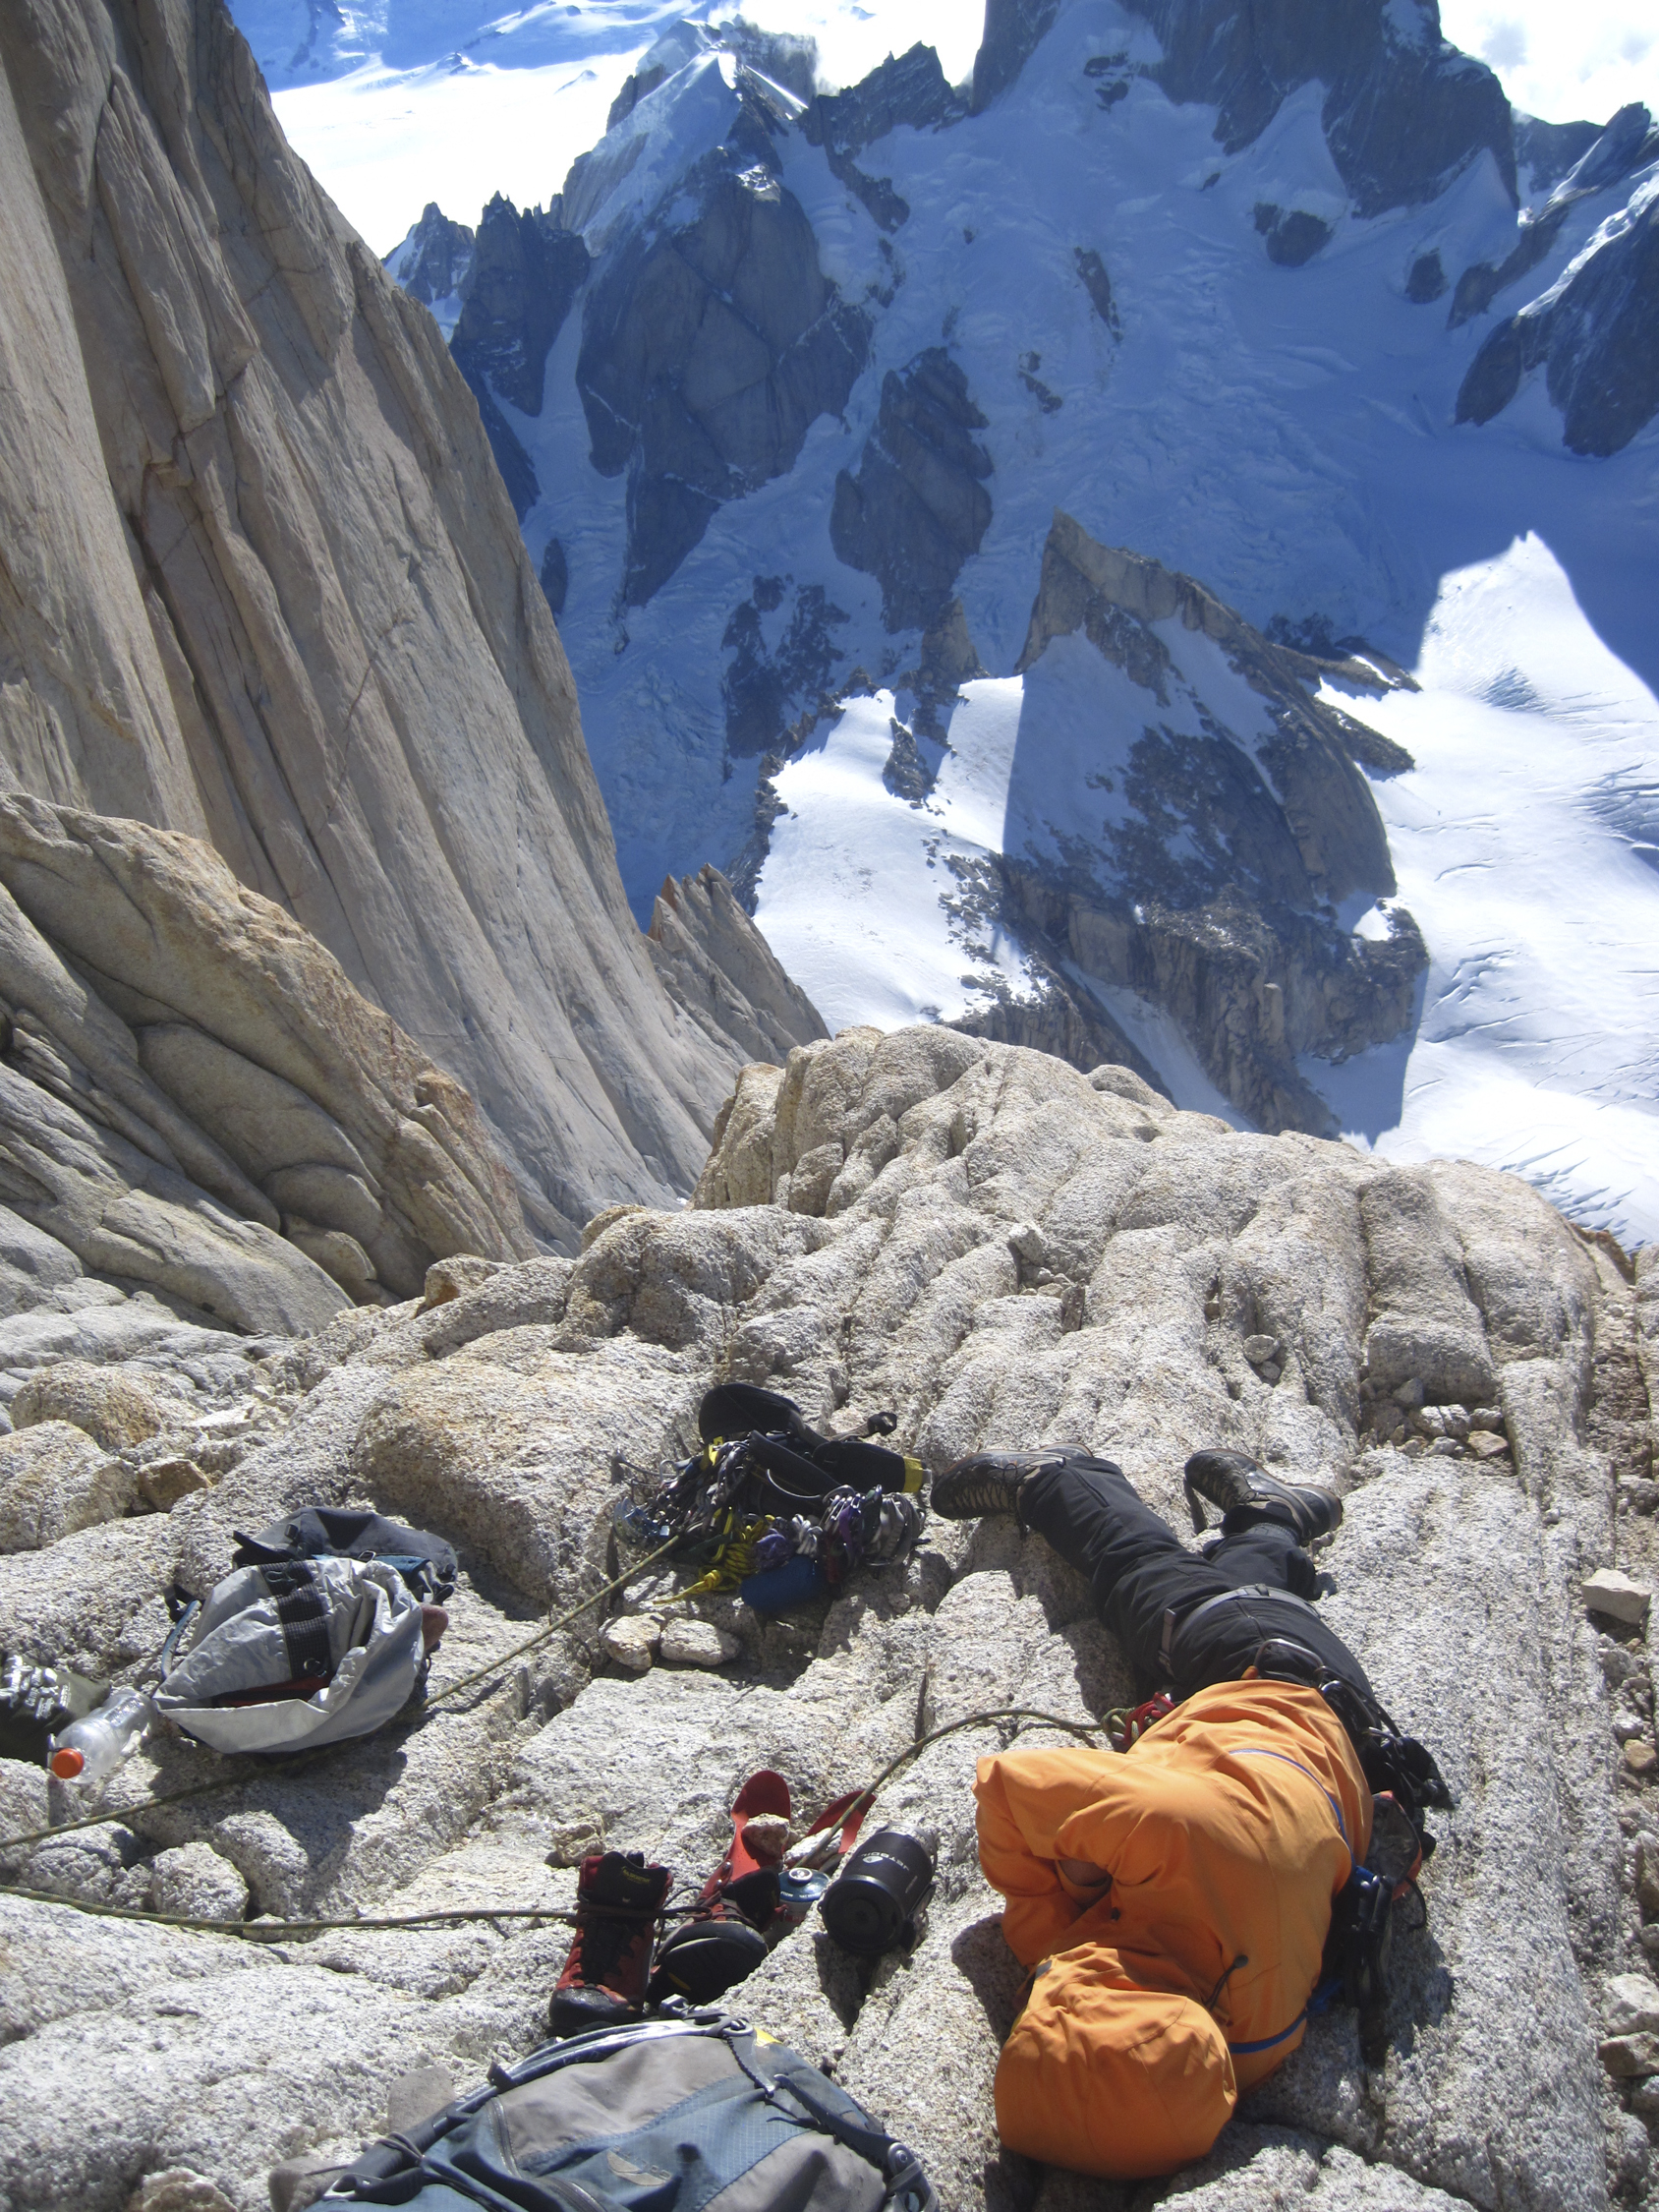 Josh Huckaby catches a little catnap on the three-star ledge high on the North Pillar on Fitz Roy in 2012. He writes, We arrived here too early to actually bivy, because it was still sunny and warm. Plus neither Troutman nor I had a sleeping bag to curl up in together. [Photo] Josh Huckaby Collection